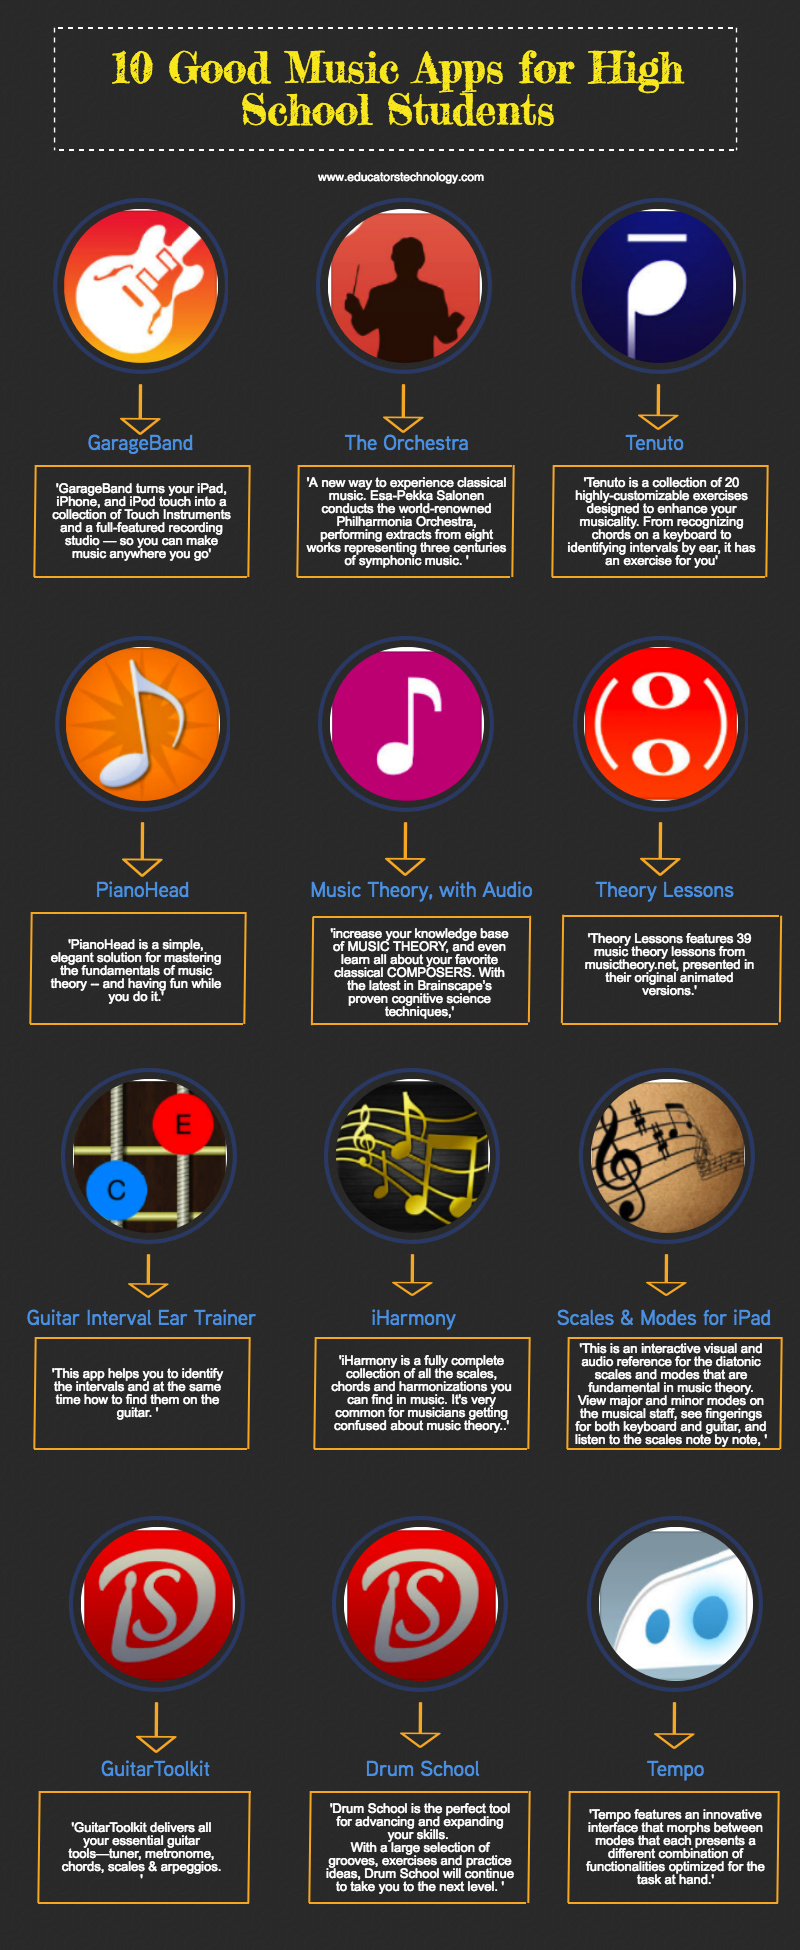 10 Good Music Apps for High School Students